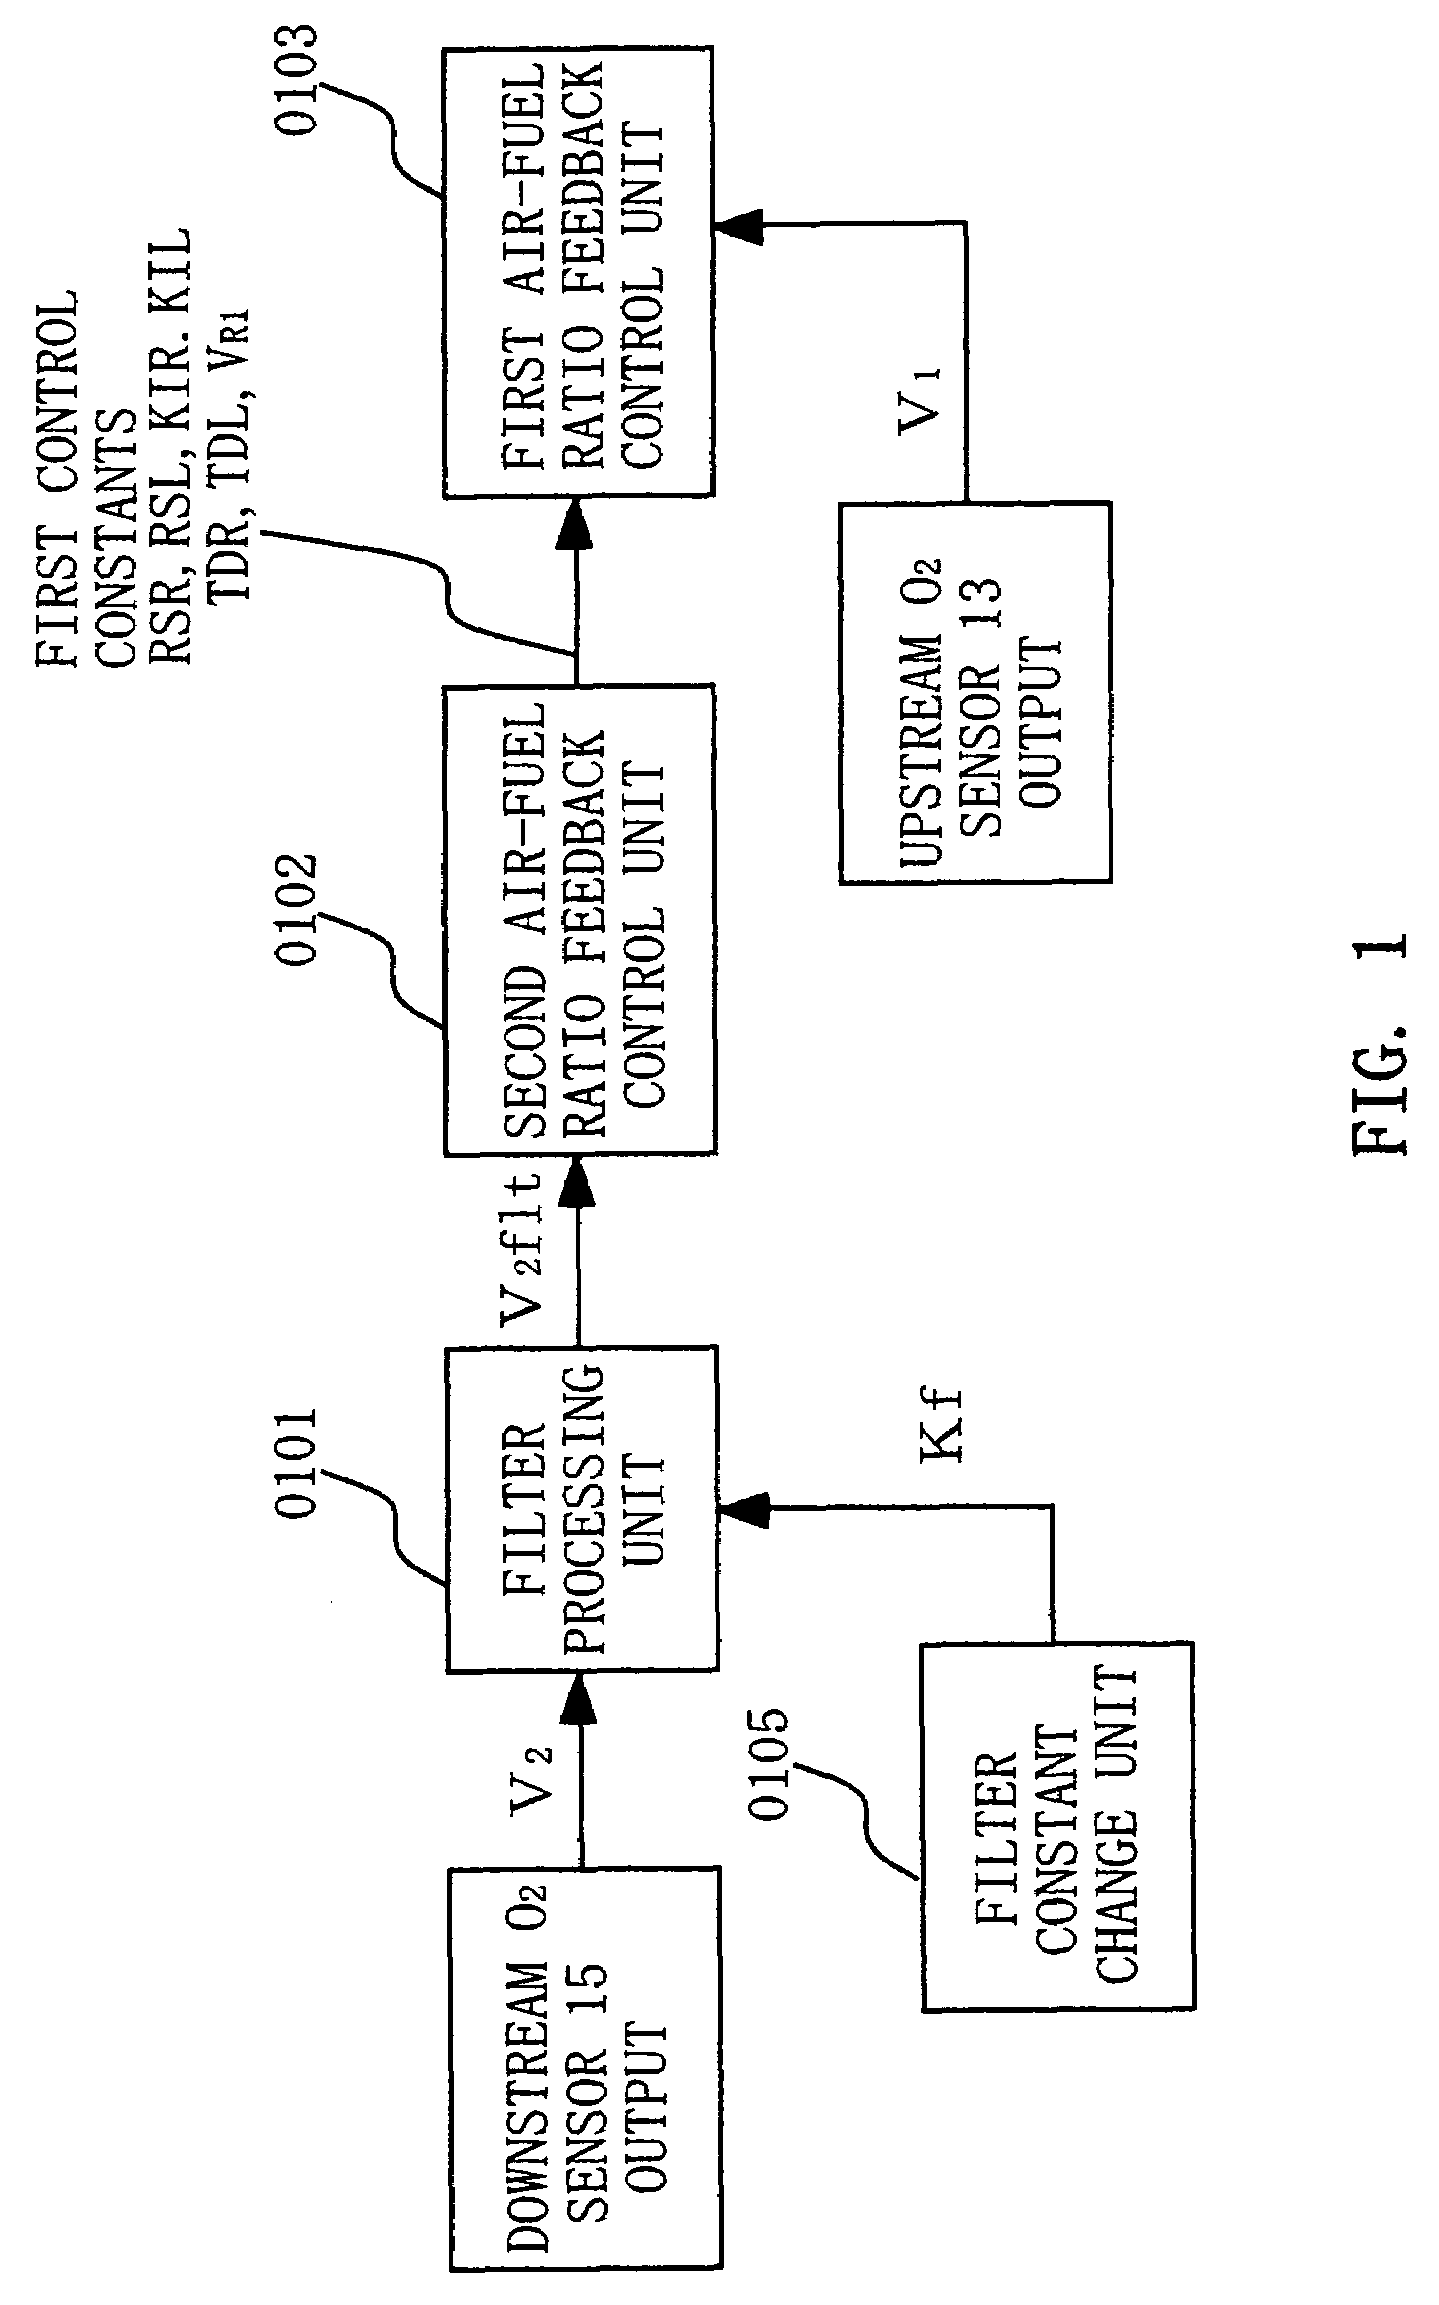 Air-fuel ratio control device for internal combustion engine